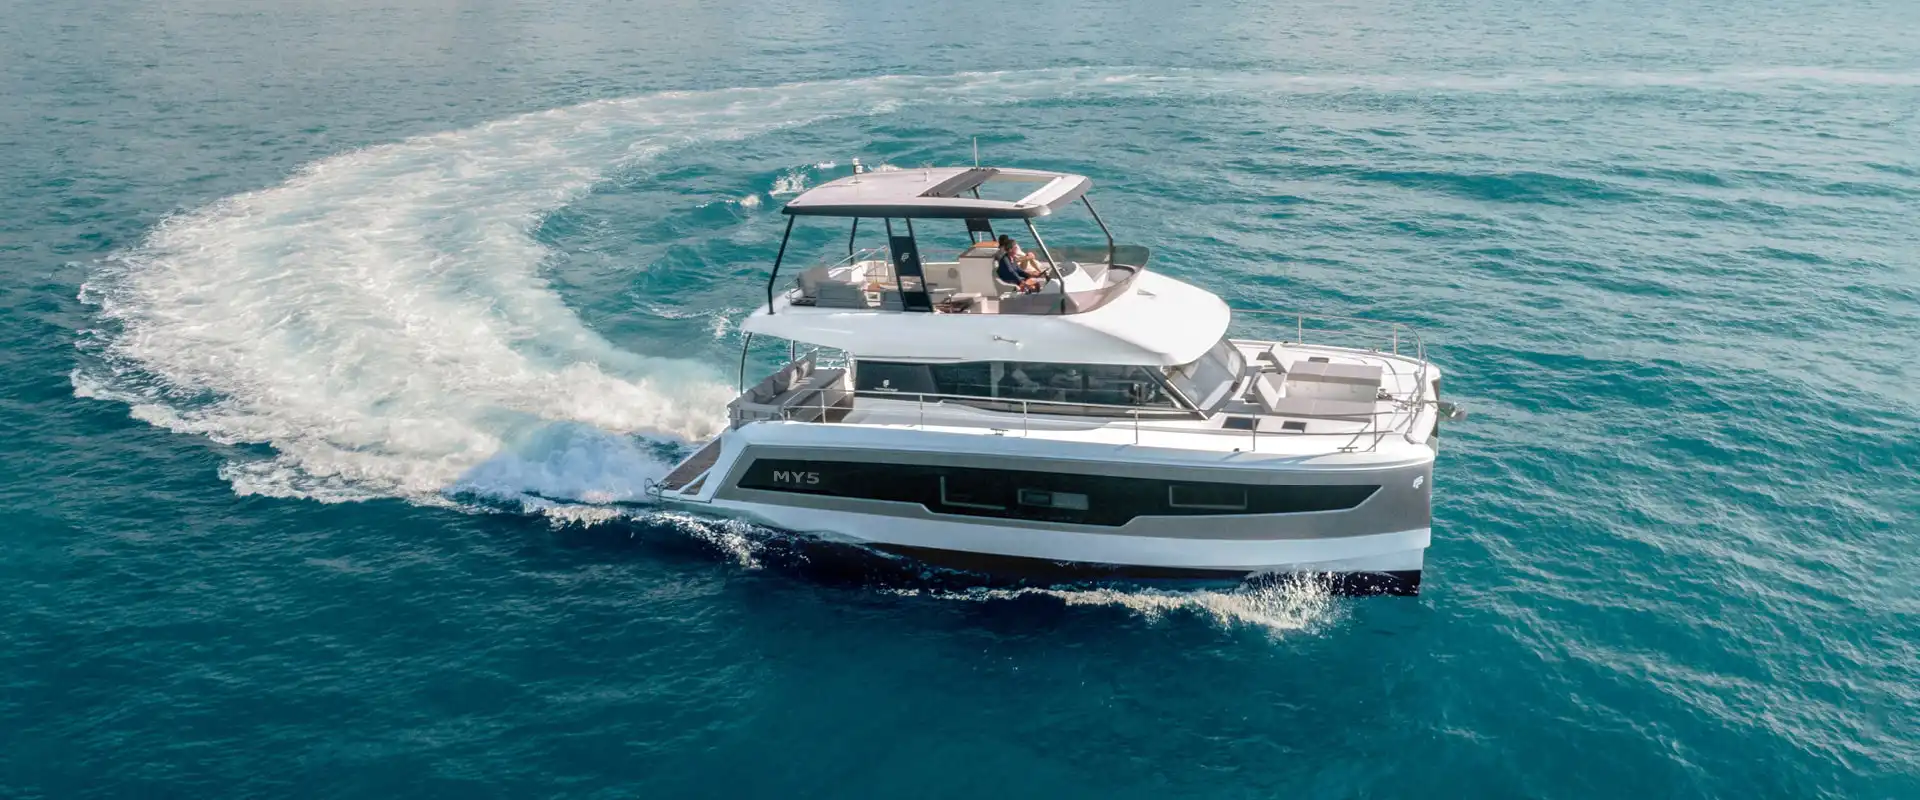 FOUNTAINE PAJOT MOTOR YACHT 5 FOR SALE